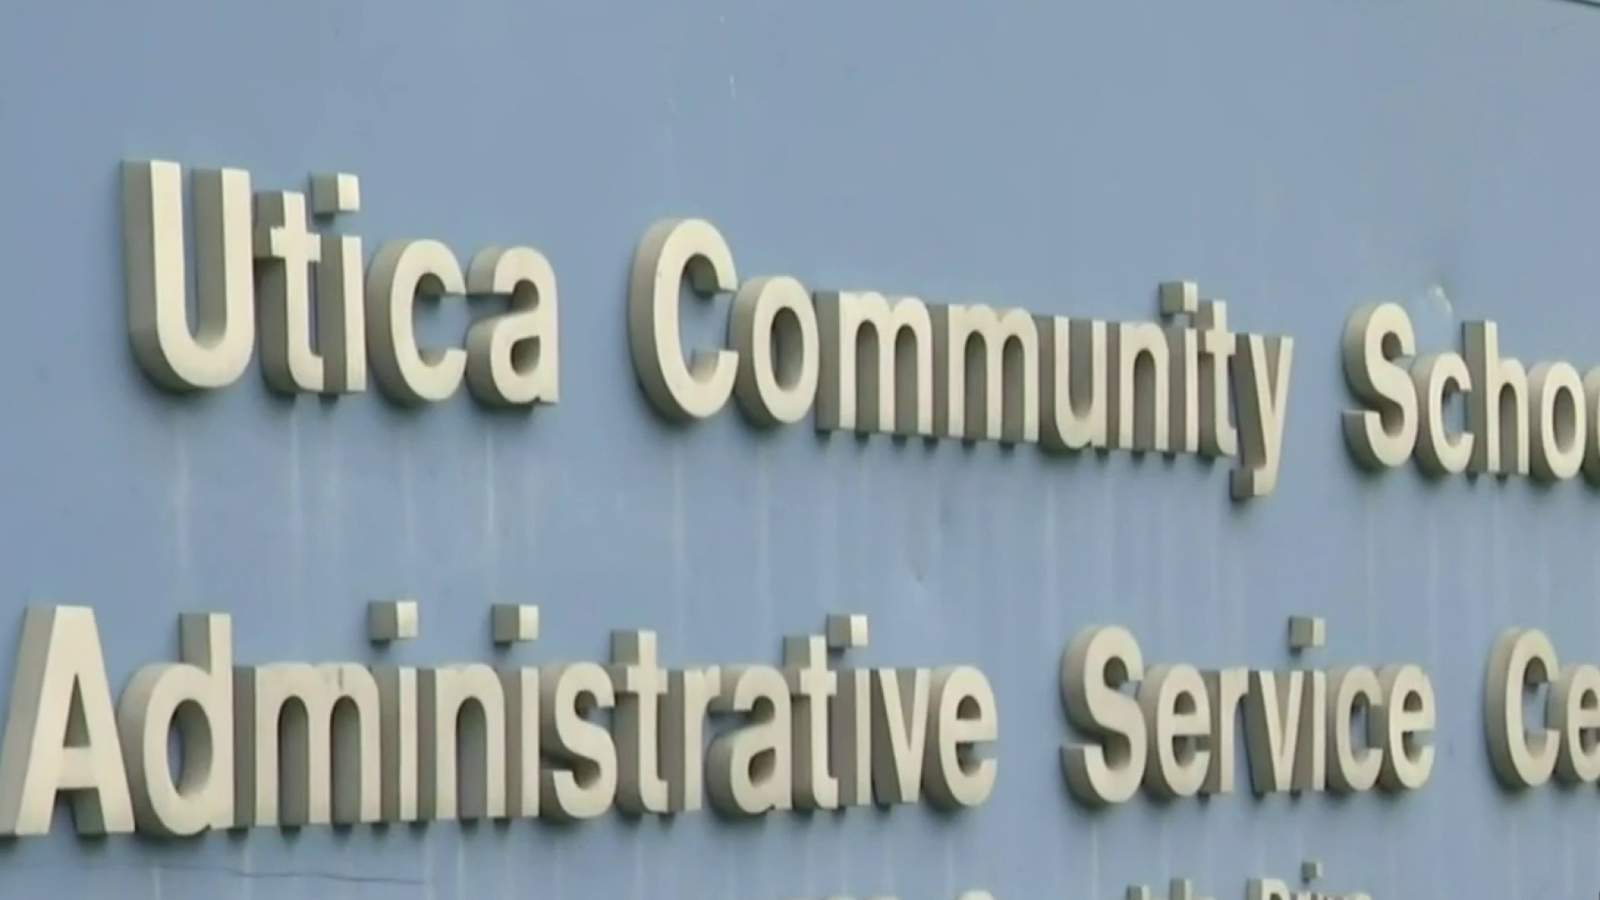 Utica Community Schools district says it is working to increase vaccine availability for staff